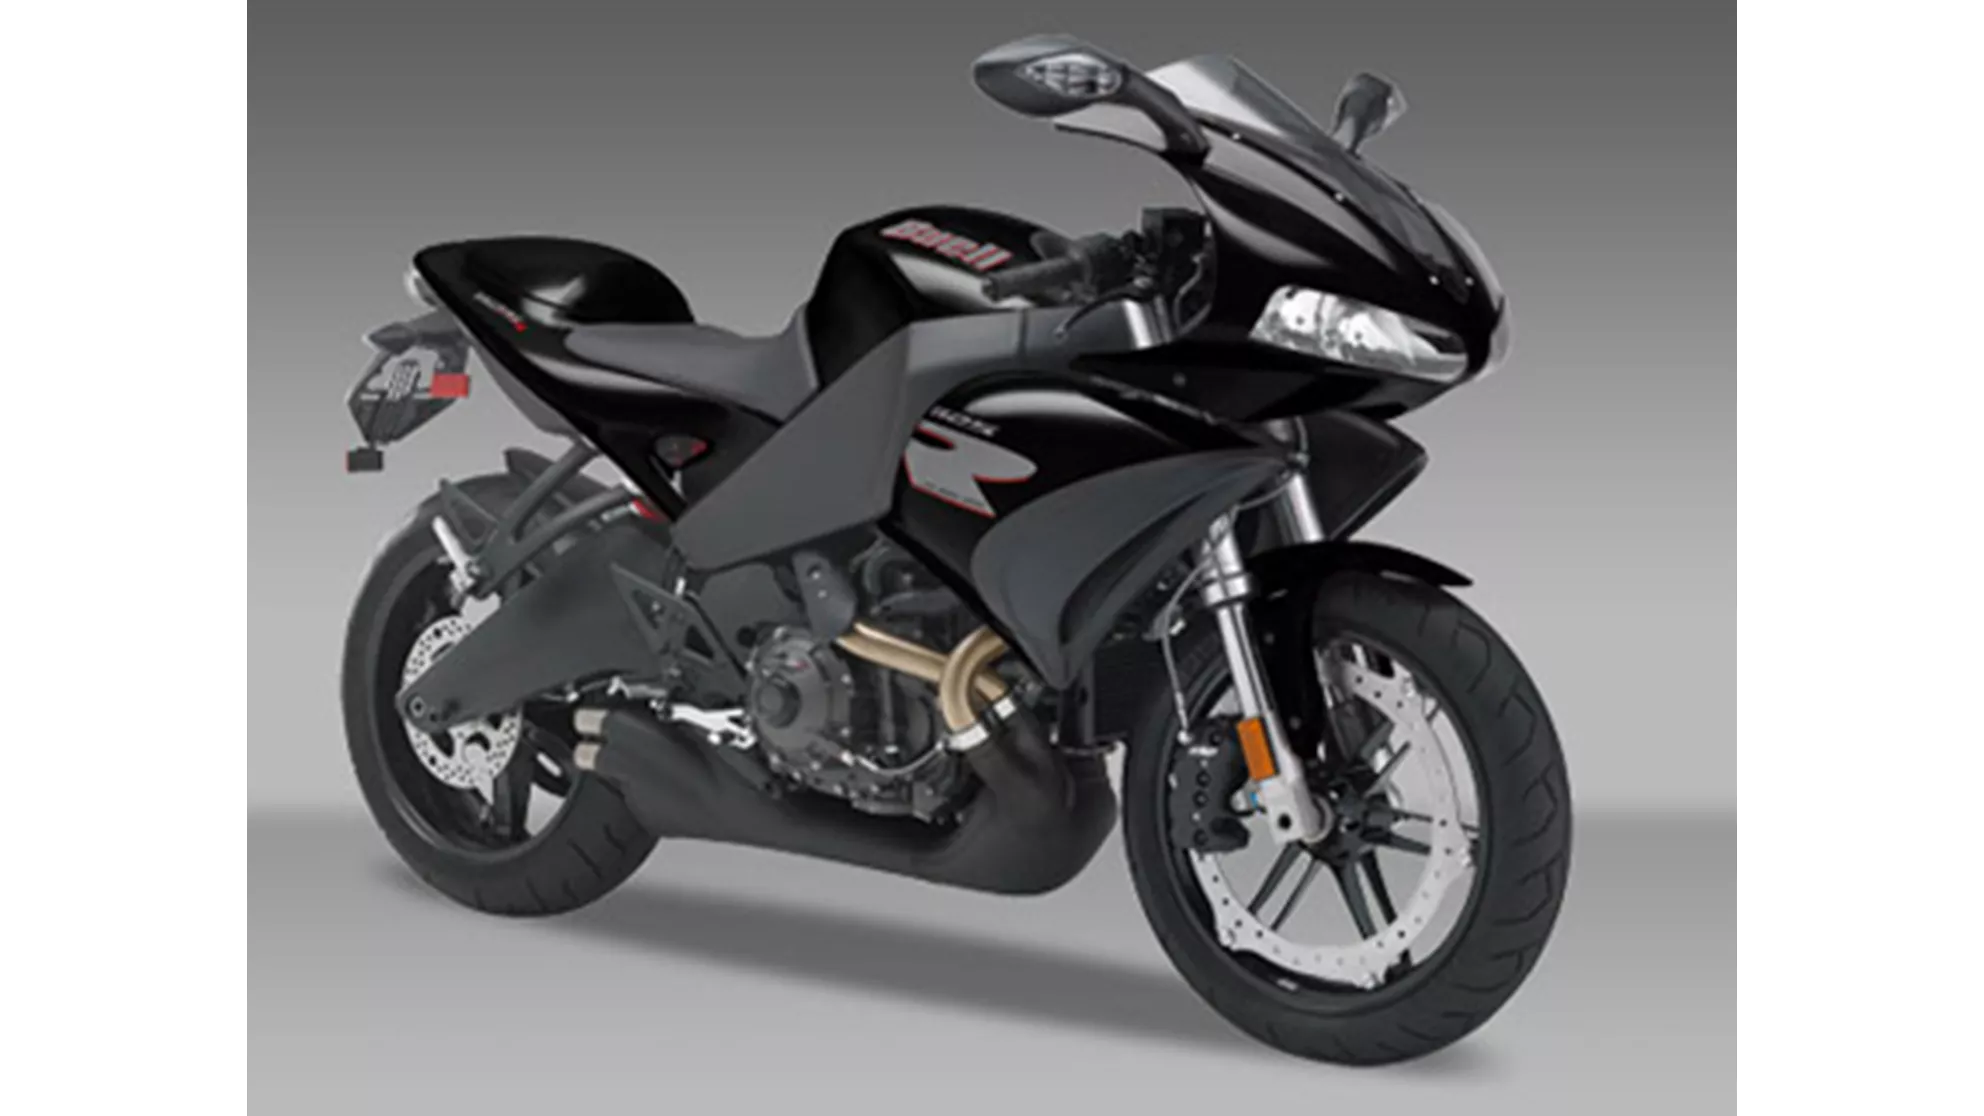 Buell 1125 R - Image 3